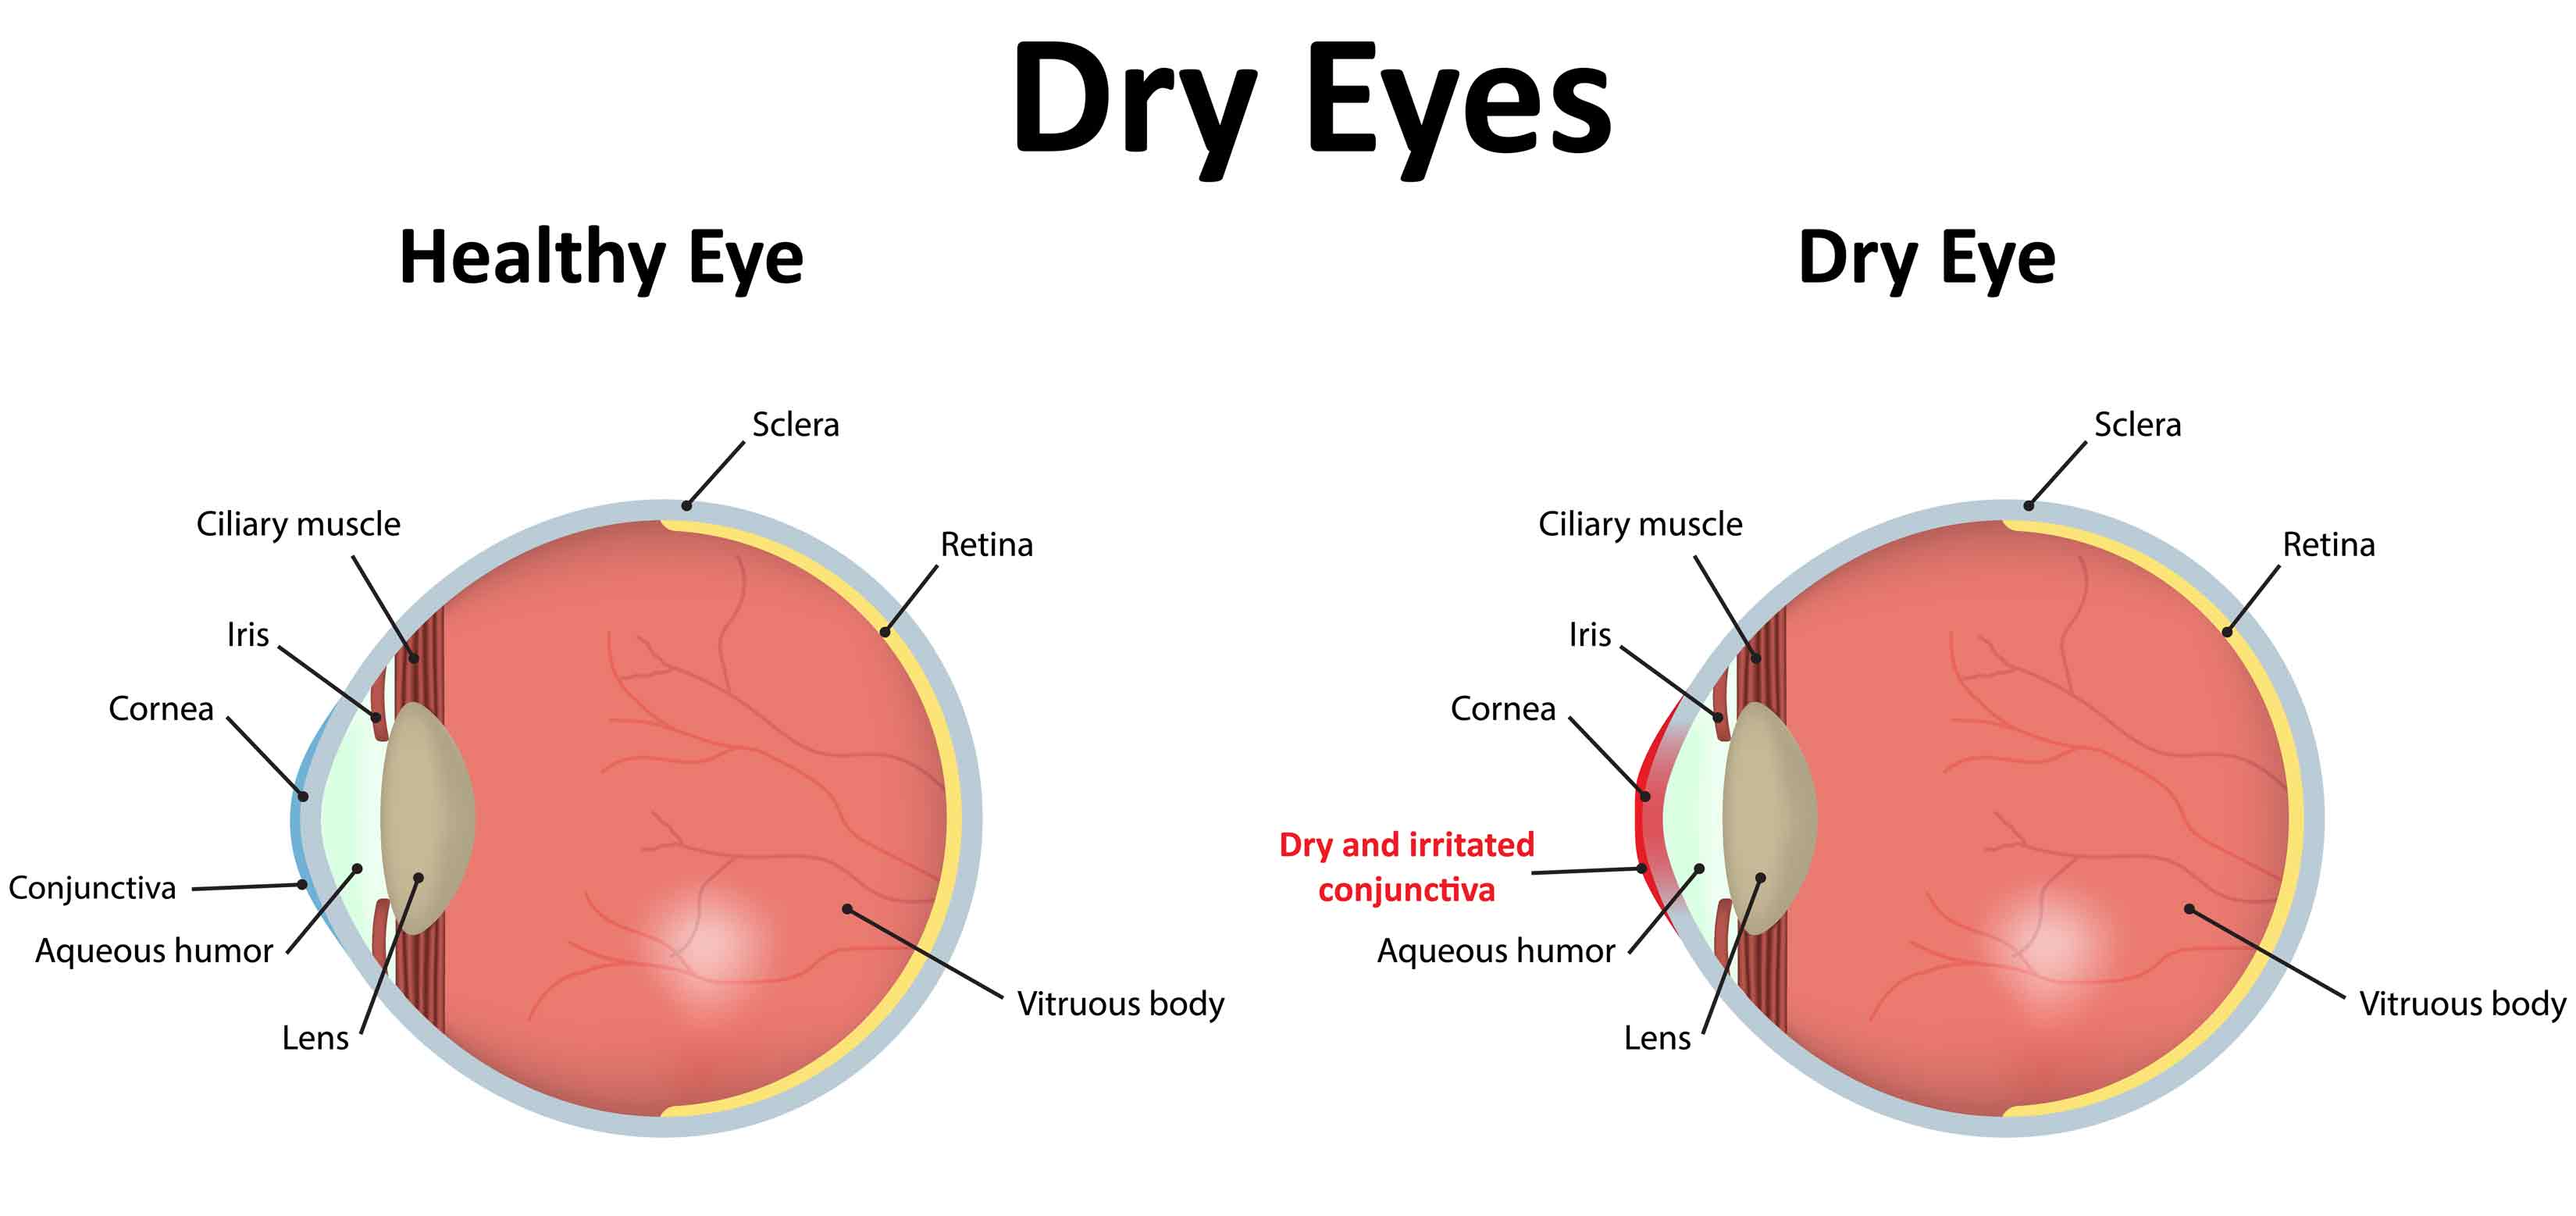 Watch out for Dry Eyes in Winter